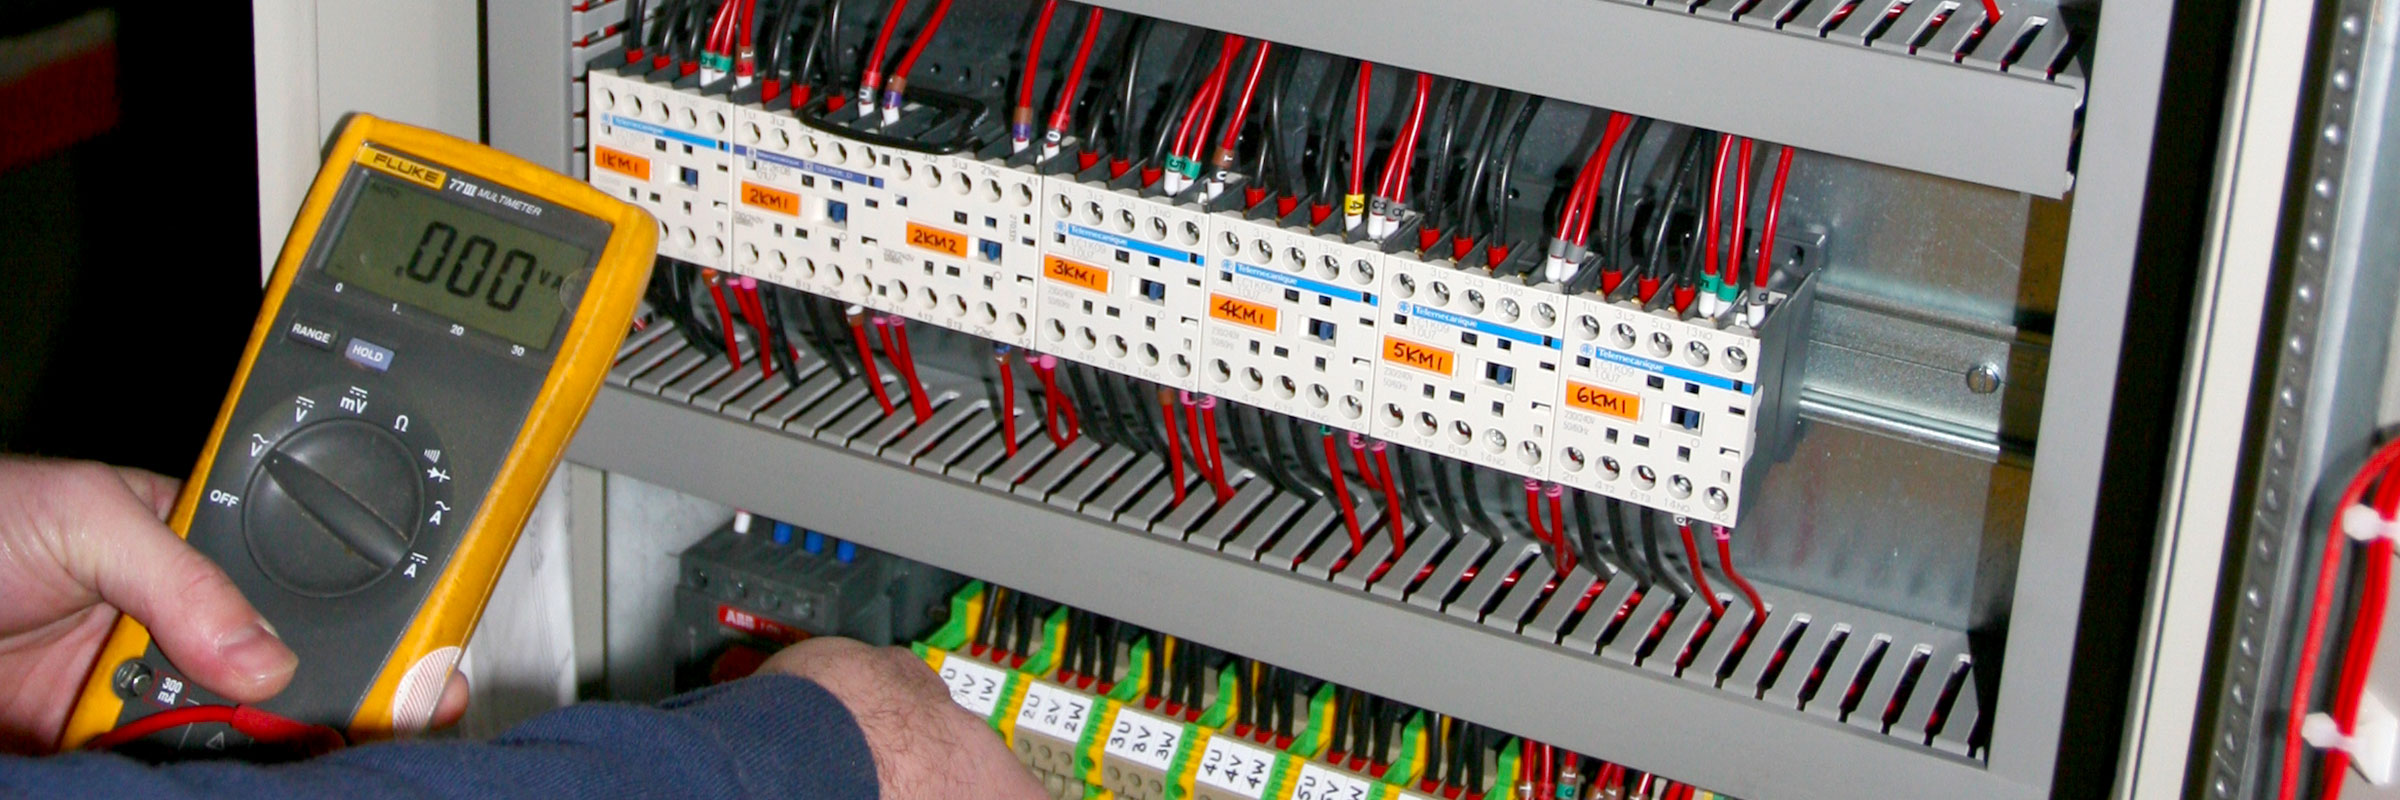 Avocet Electrical-Industrial-Electricians-Power-Lighting-3 Phase-Cambridgeshire